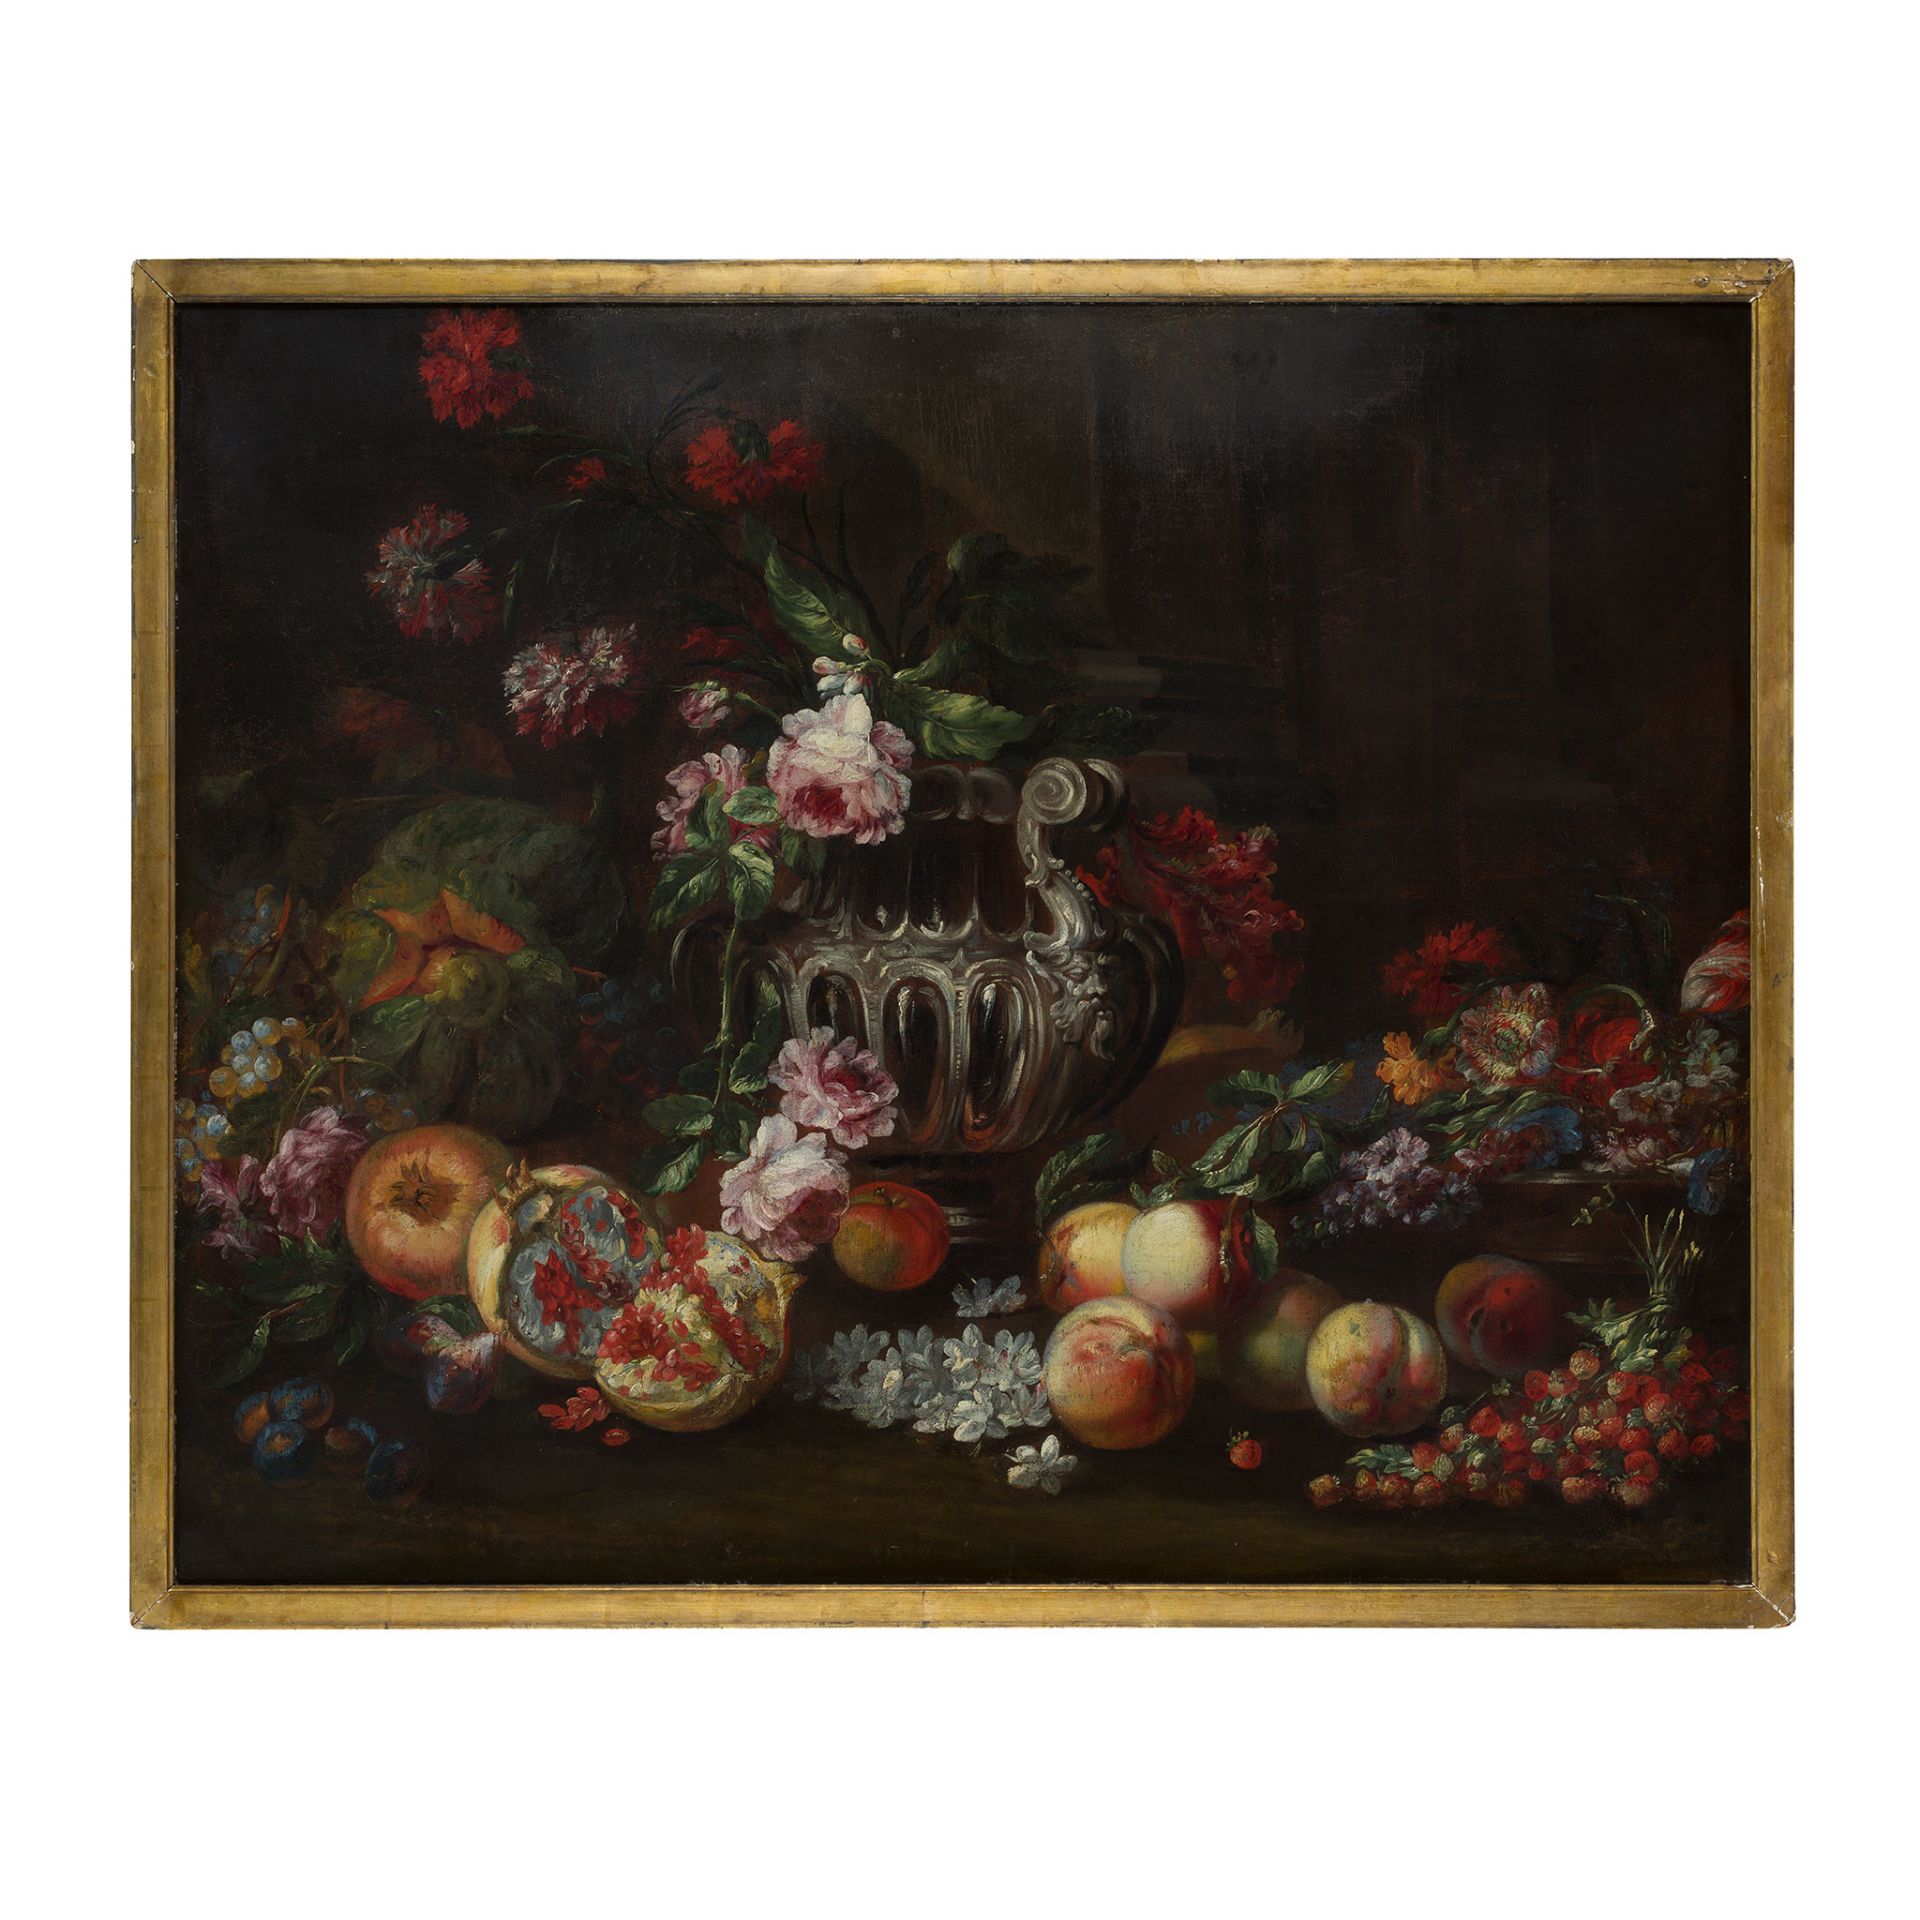 FOLLOWER OF MICHELANGELO DI CAMPIDOGLIO A STILL LIFE OF ASSORTED FRUIT AND FLOWERS WITH SILVER URN - Image 2 of 2